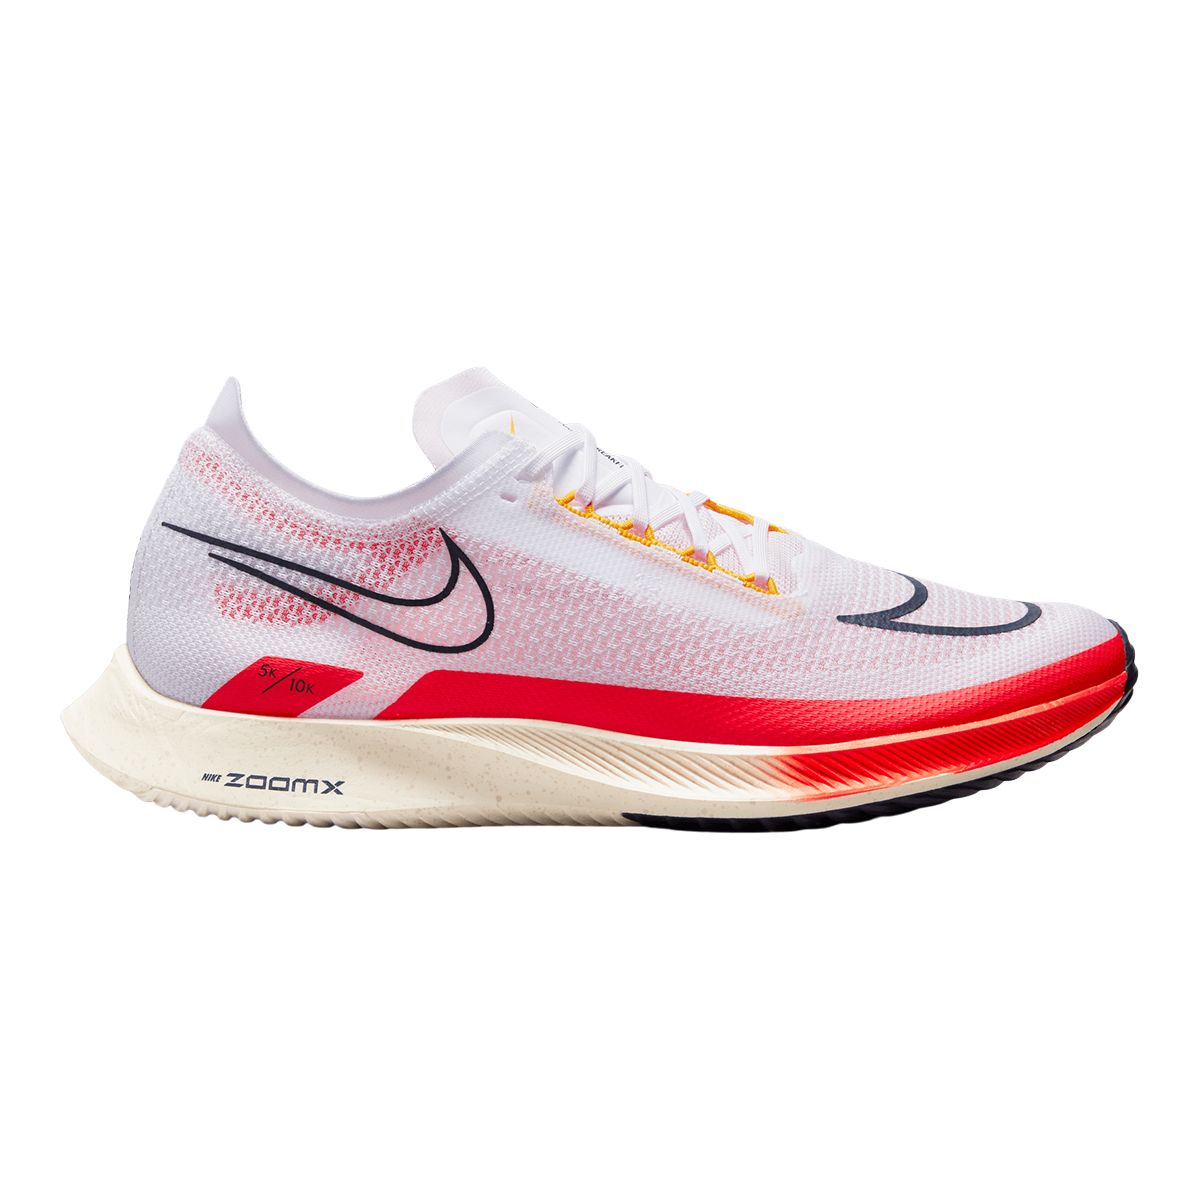 Nike Men's ZoomX Streakfly Running Shoes